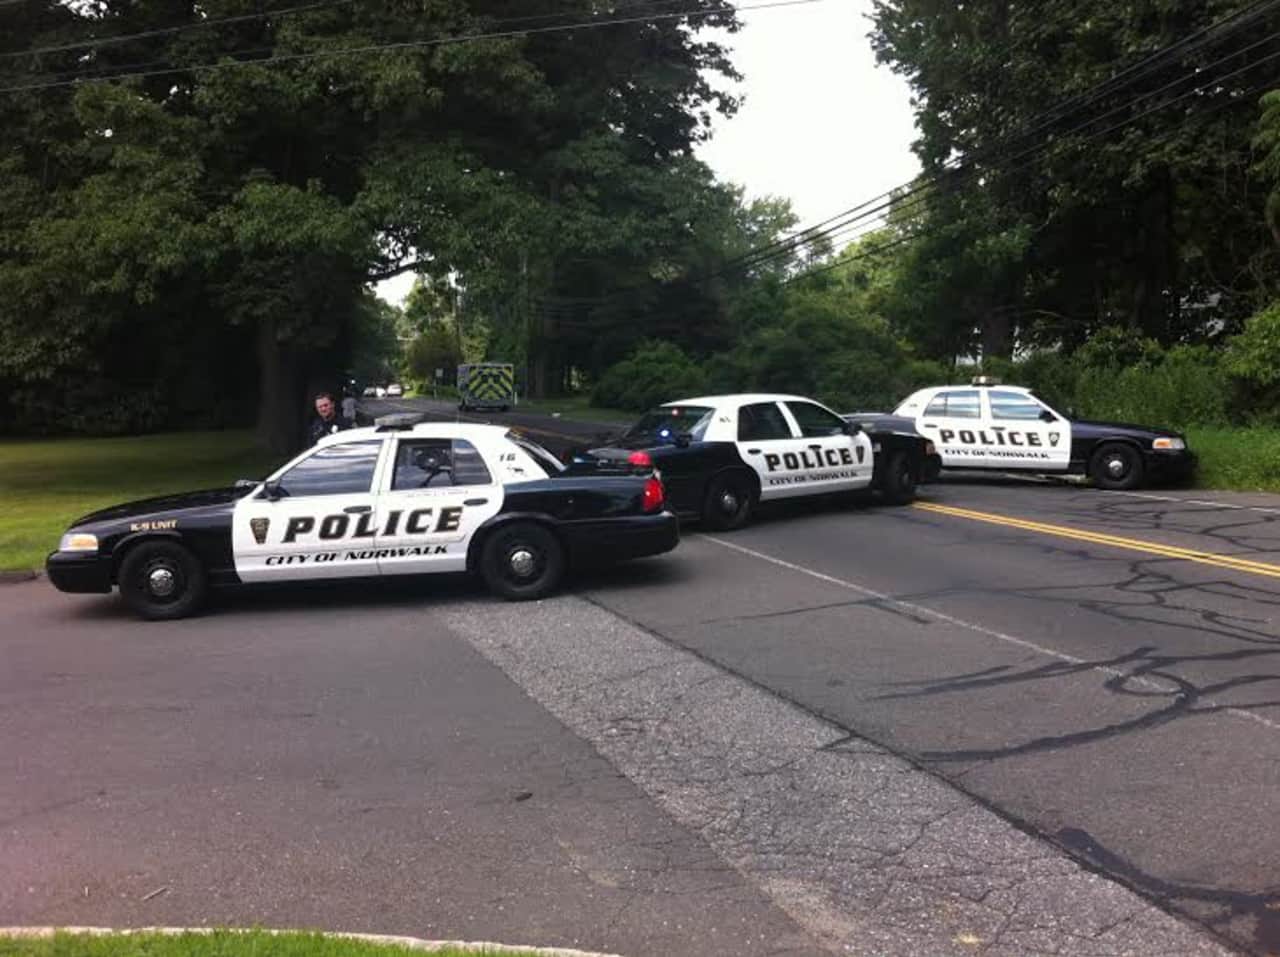 West Rocks Road in Norwalk is blocked by police cars on Tuesday afternoon.